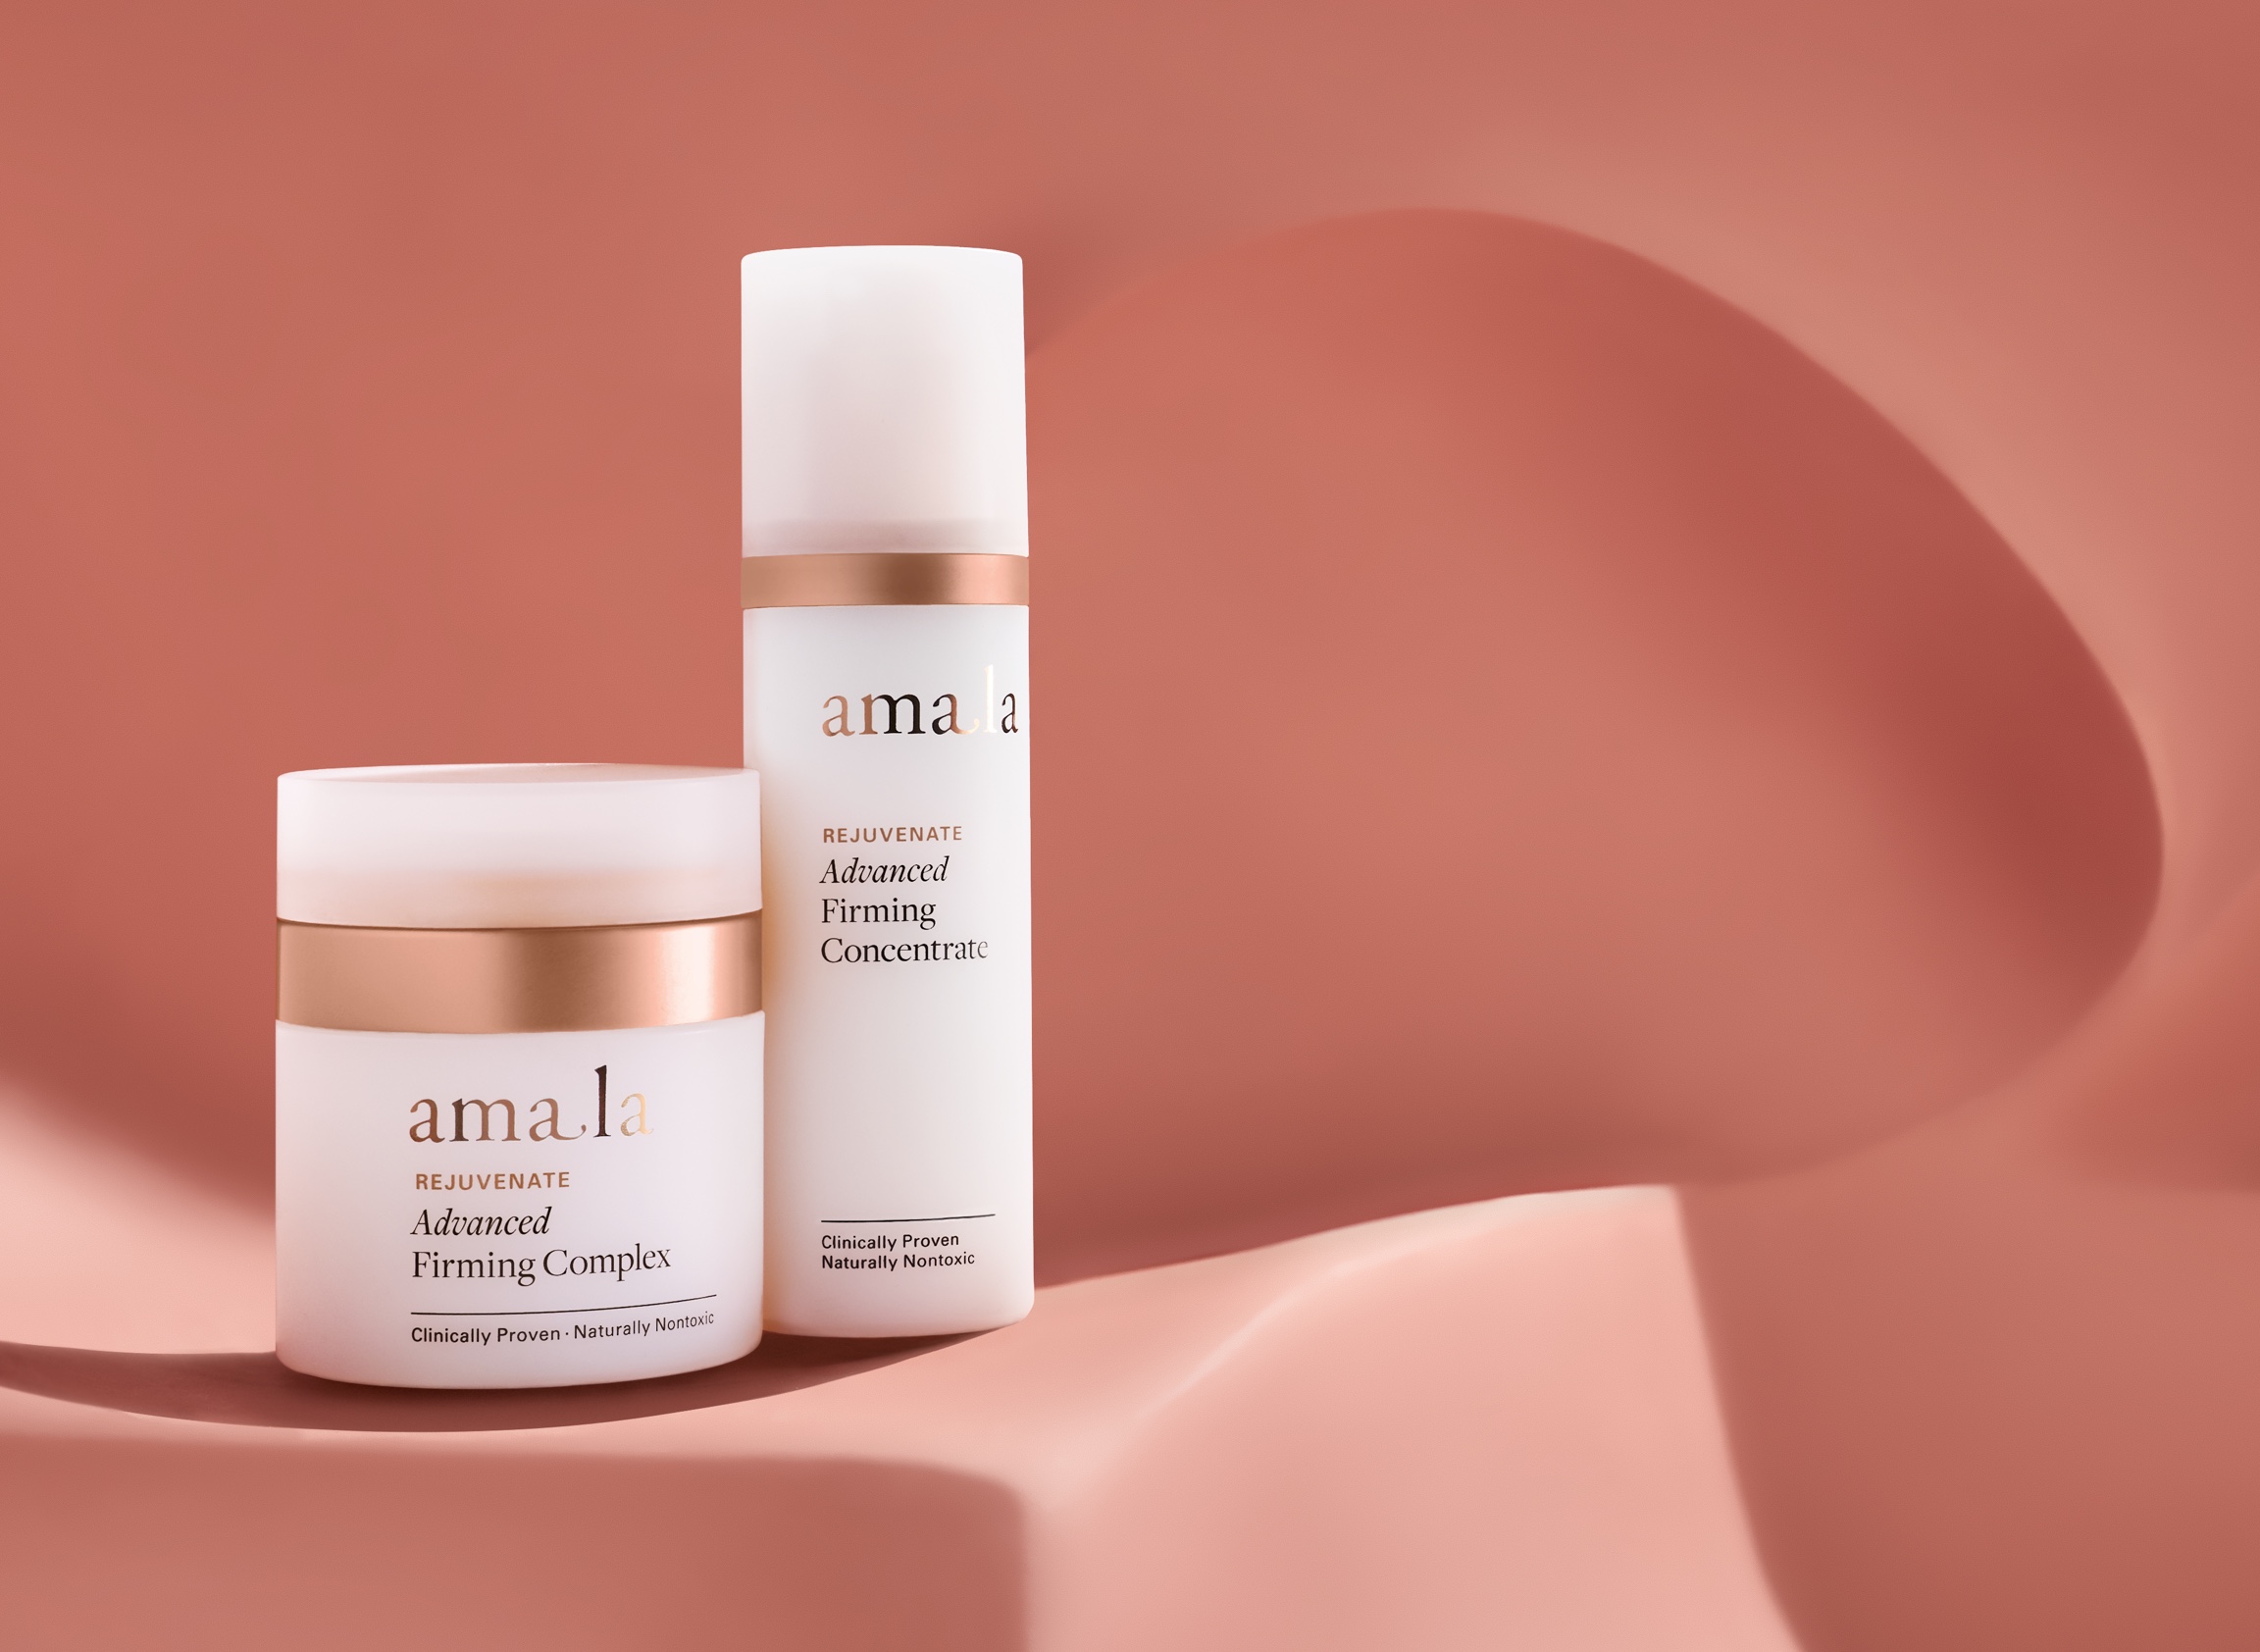 Jar of Amala Advanced Firming Complex, and Advanced Firming Concentrate